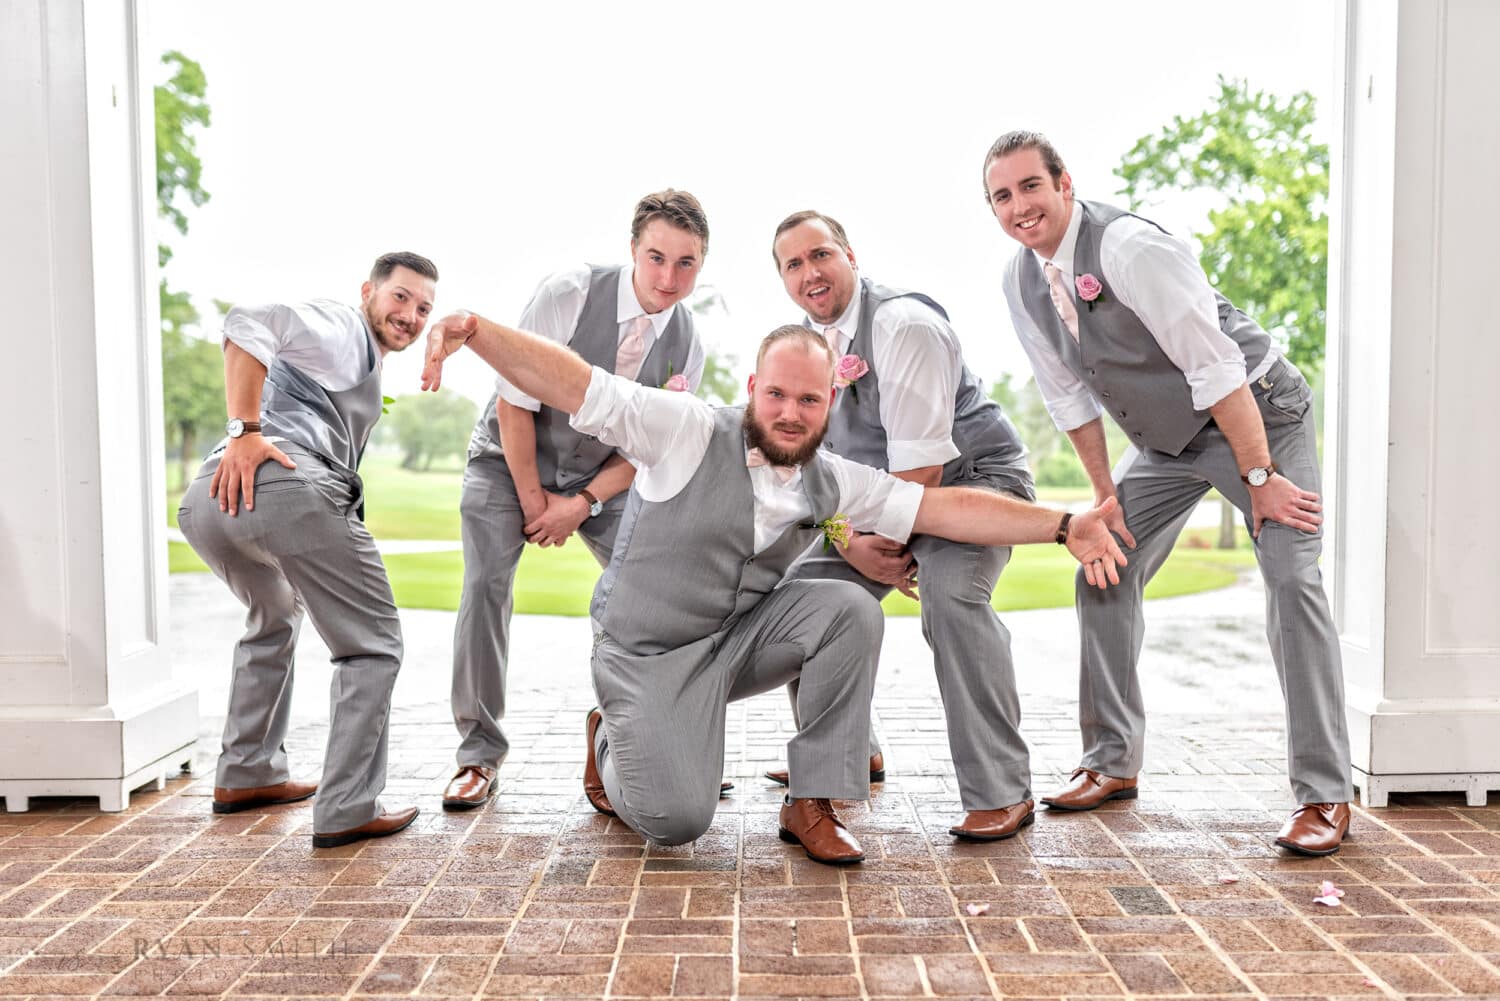 Groomsmen having fun on a rainy day - using off camera flash helps with the bright background -